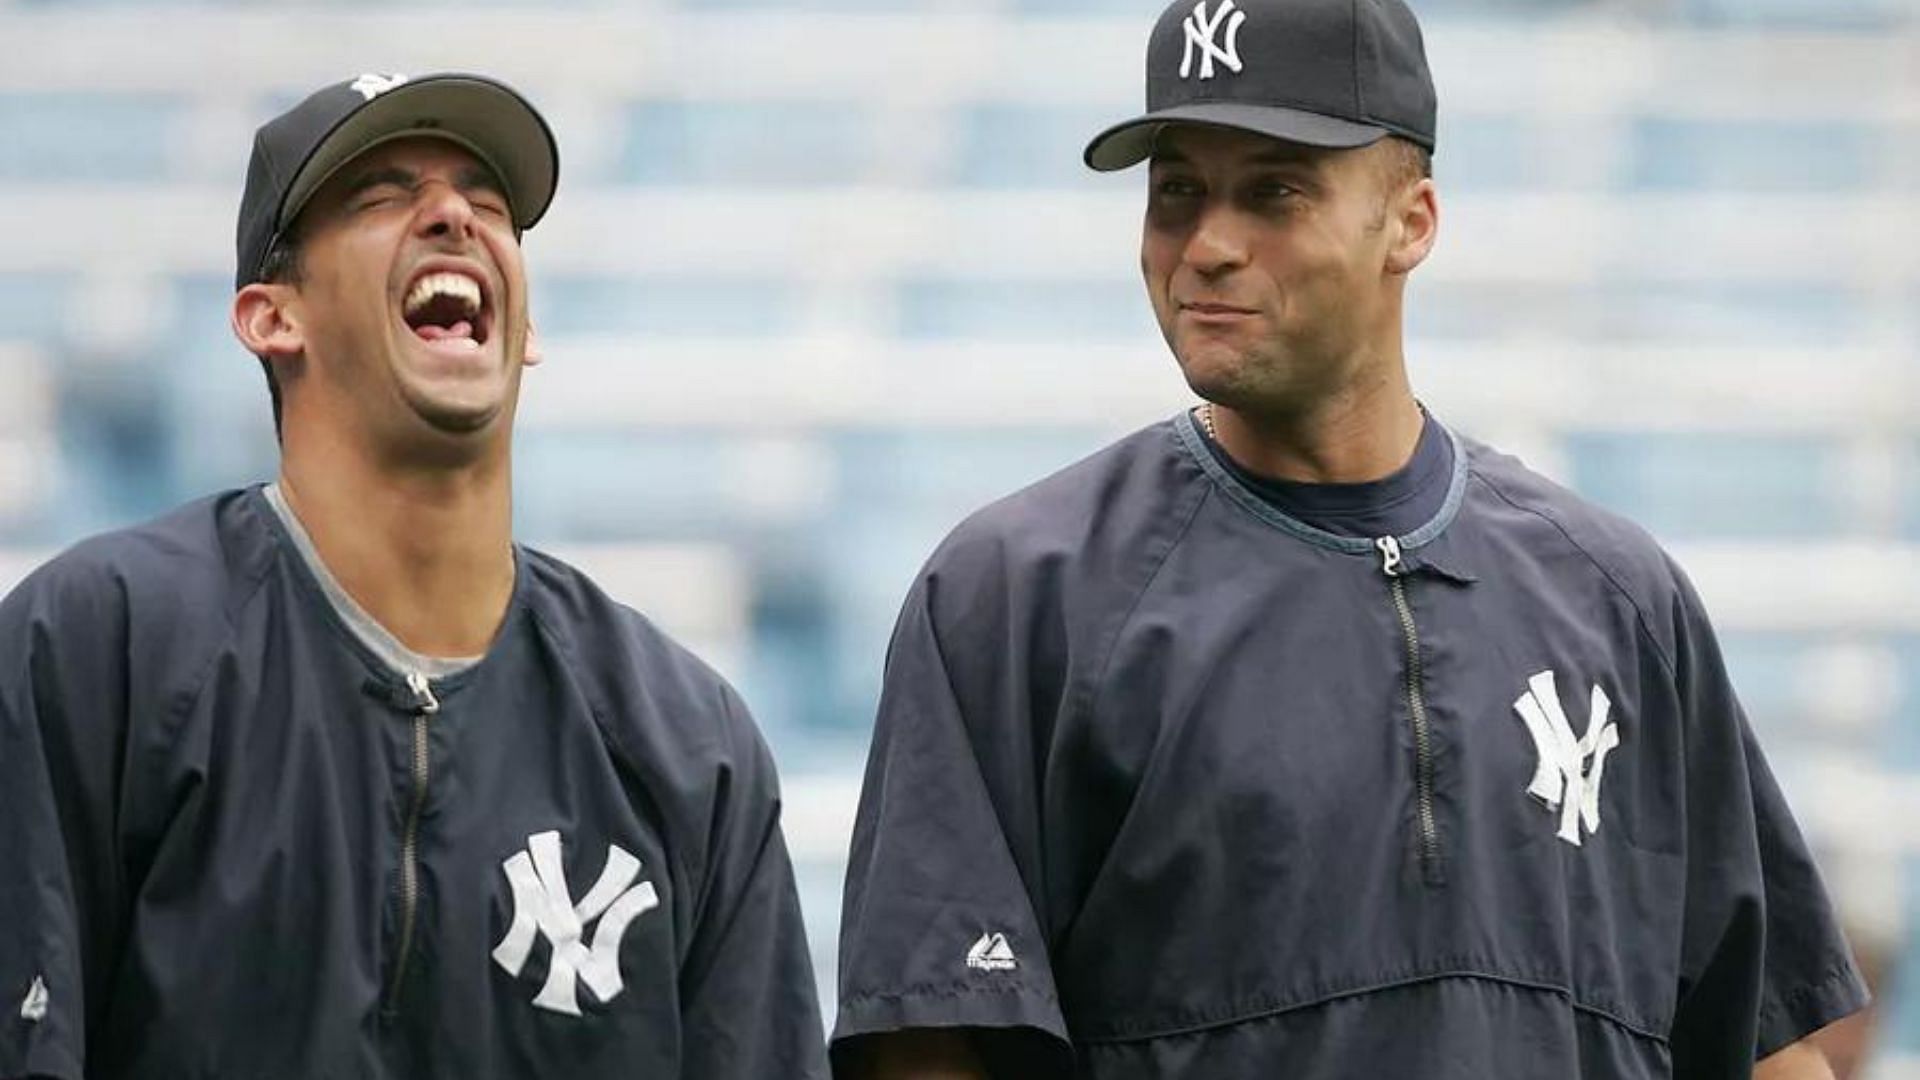 Lupica: Derek Jeter taught the Yankees how to win again